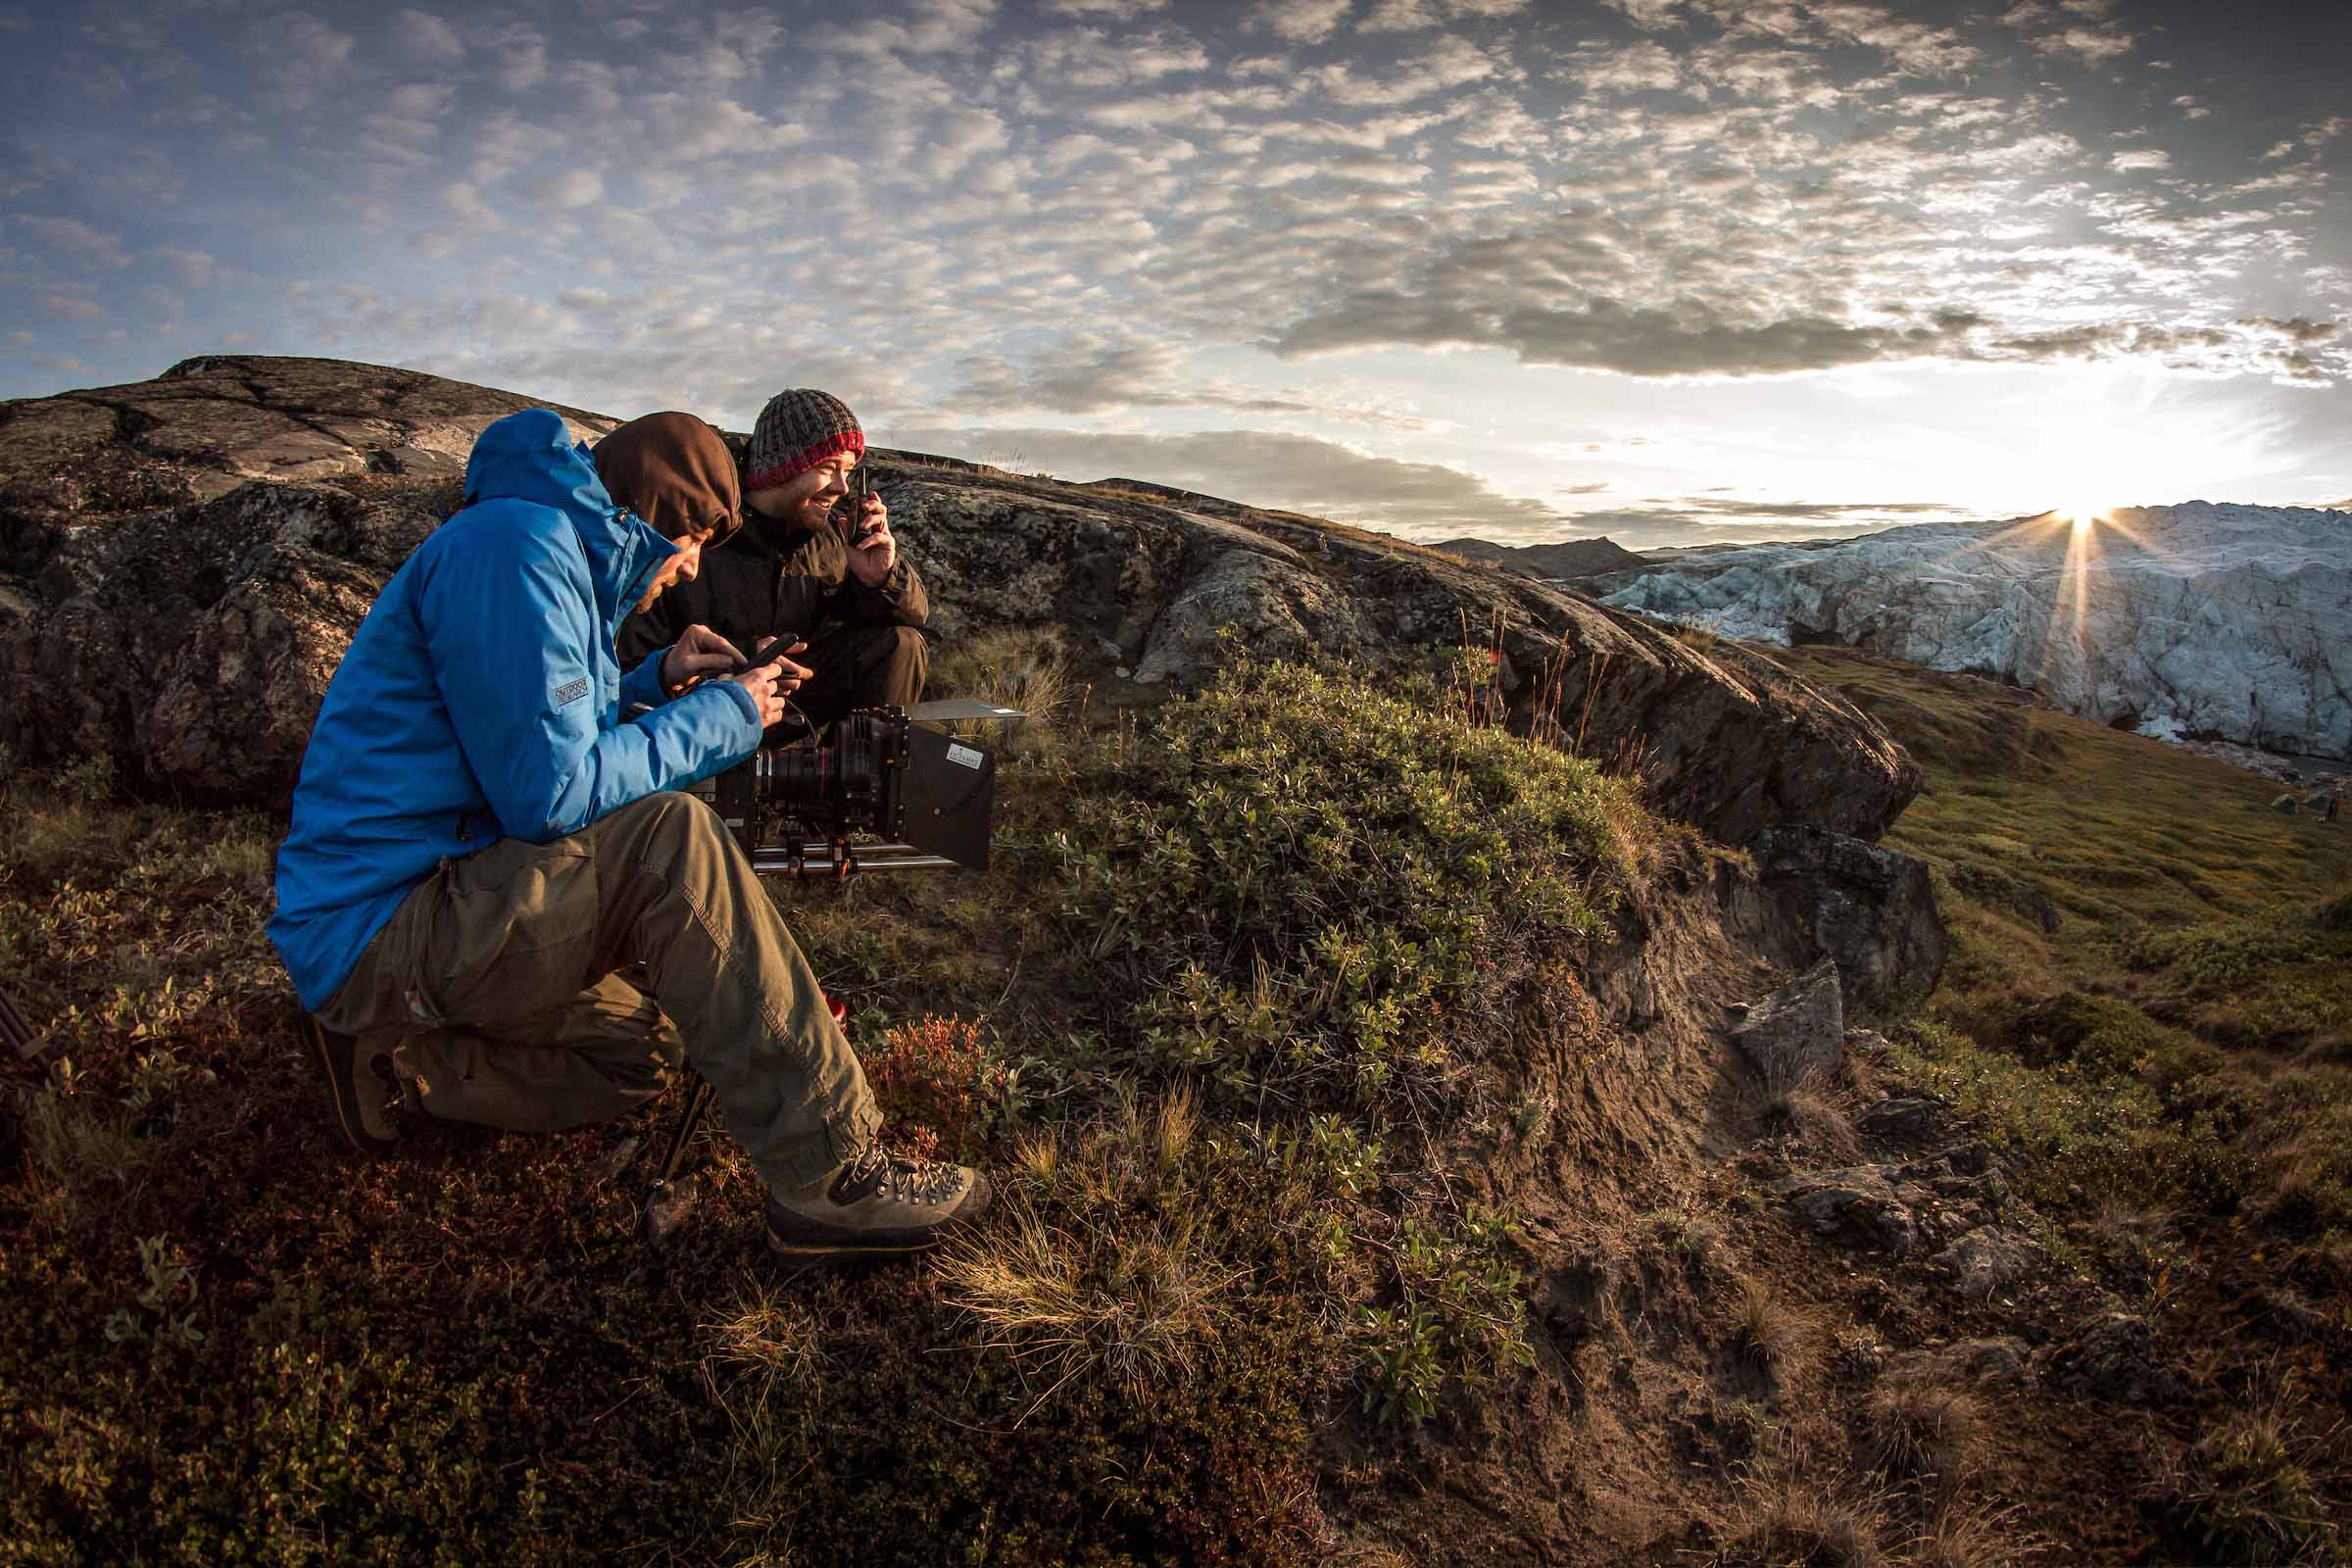 Film makers working at sunrise near Russell Glacier in Greenland. Photo by Mads Pihl - Visit Greenland